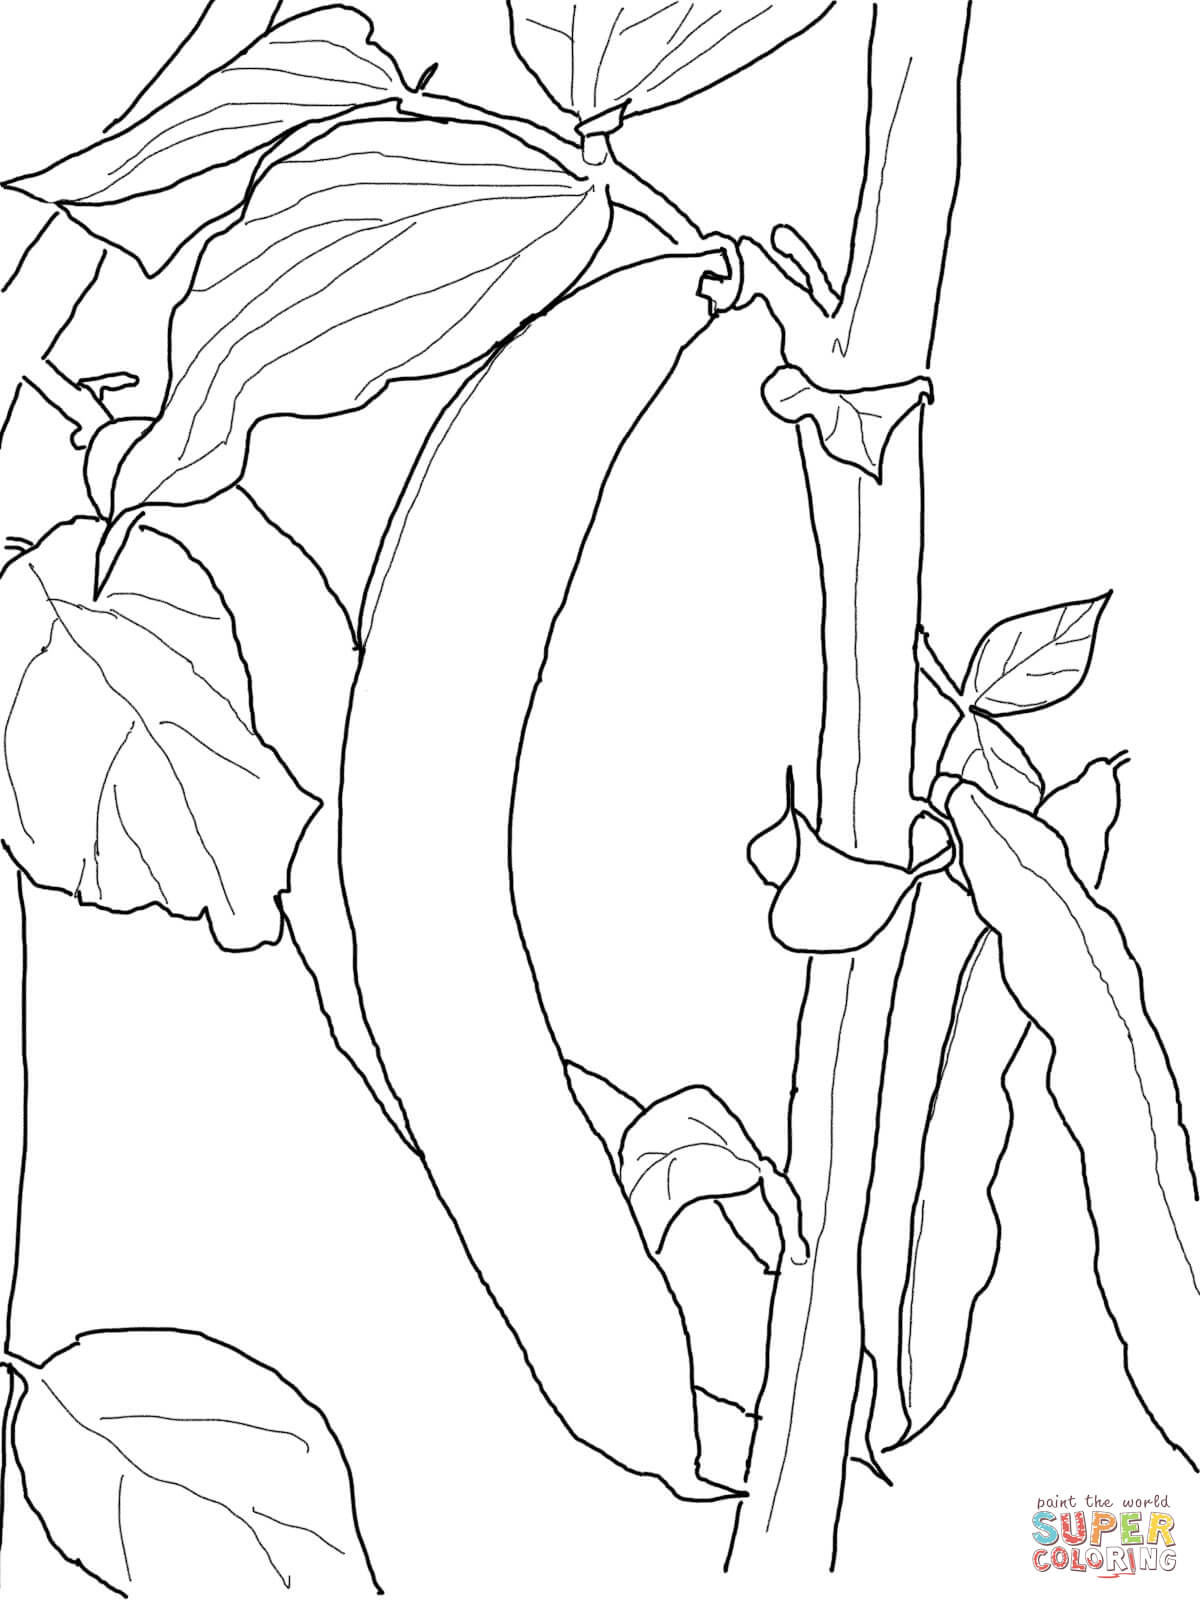 Green Bean coloring page | Free Printable Coloring Pages